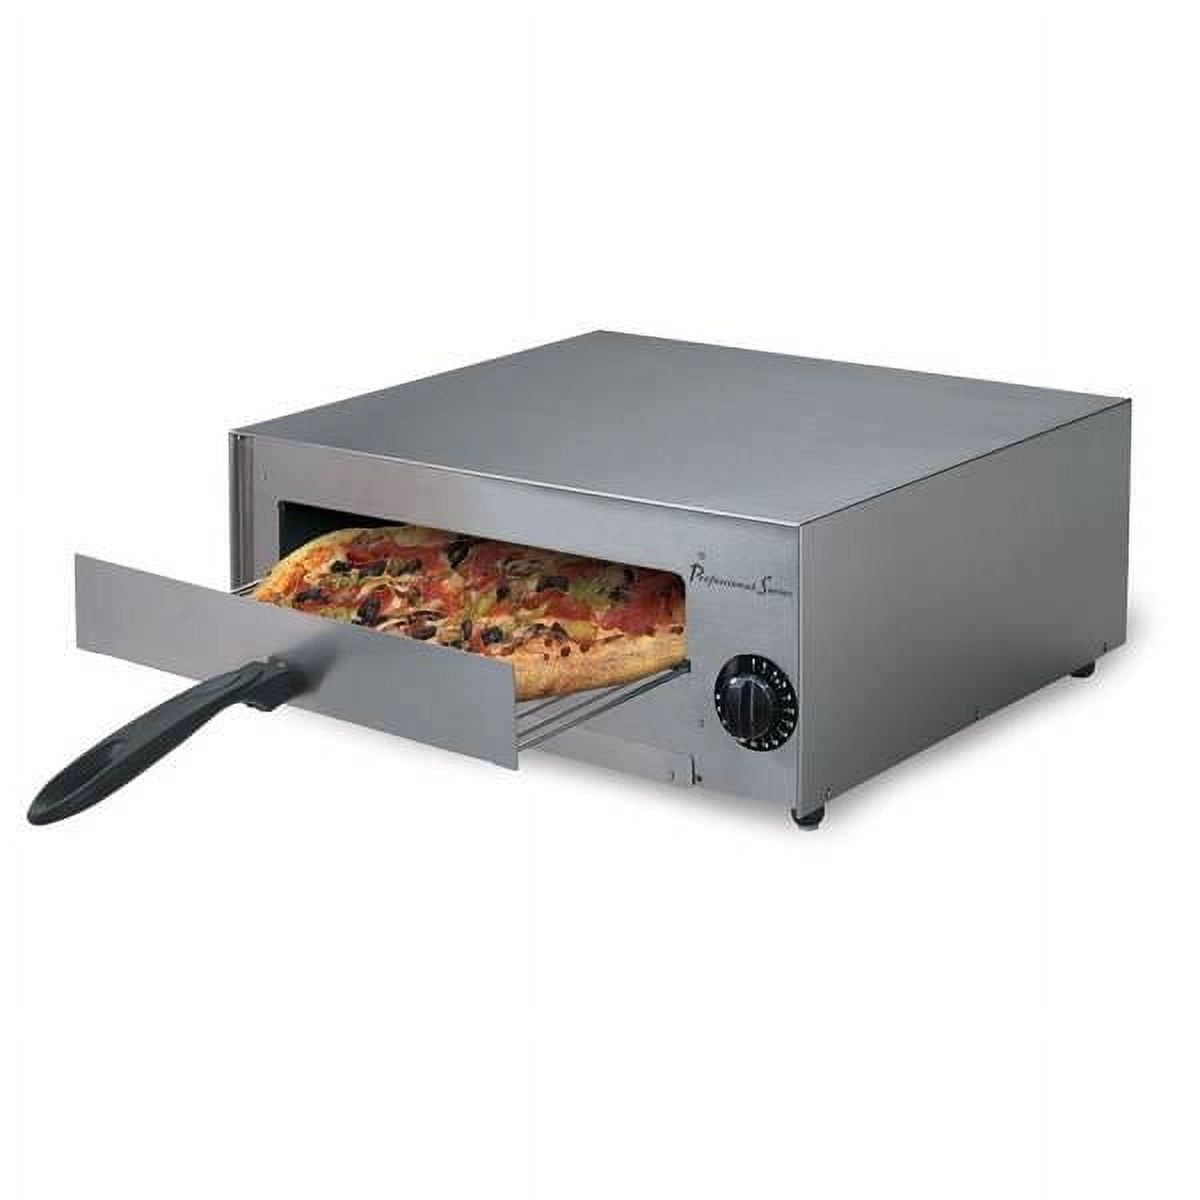 【Per-order】Qstoves 16-inch Auto-Rotating Pizza Oven with Water Proof Cover (with Rotating Motor) GAS Auto-Rotating / Silver